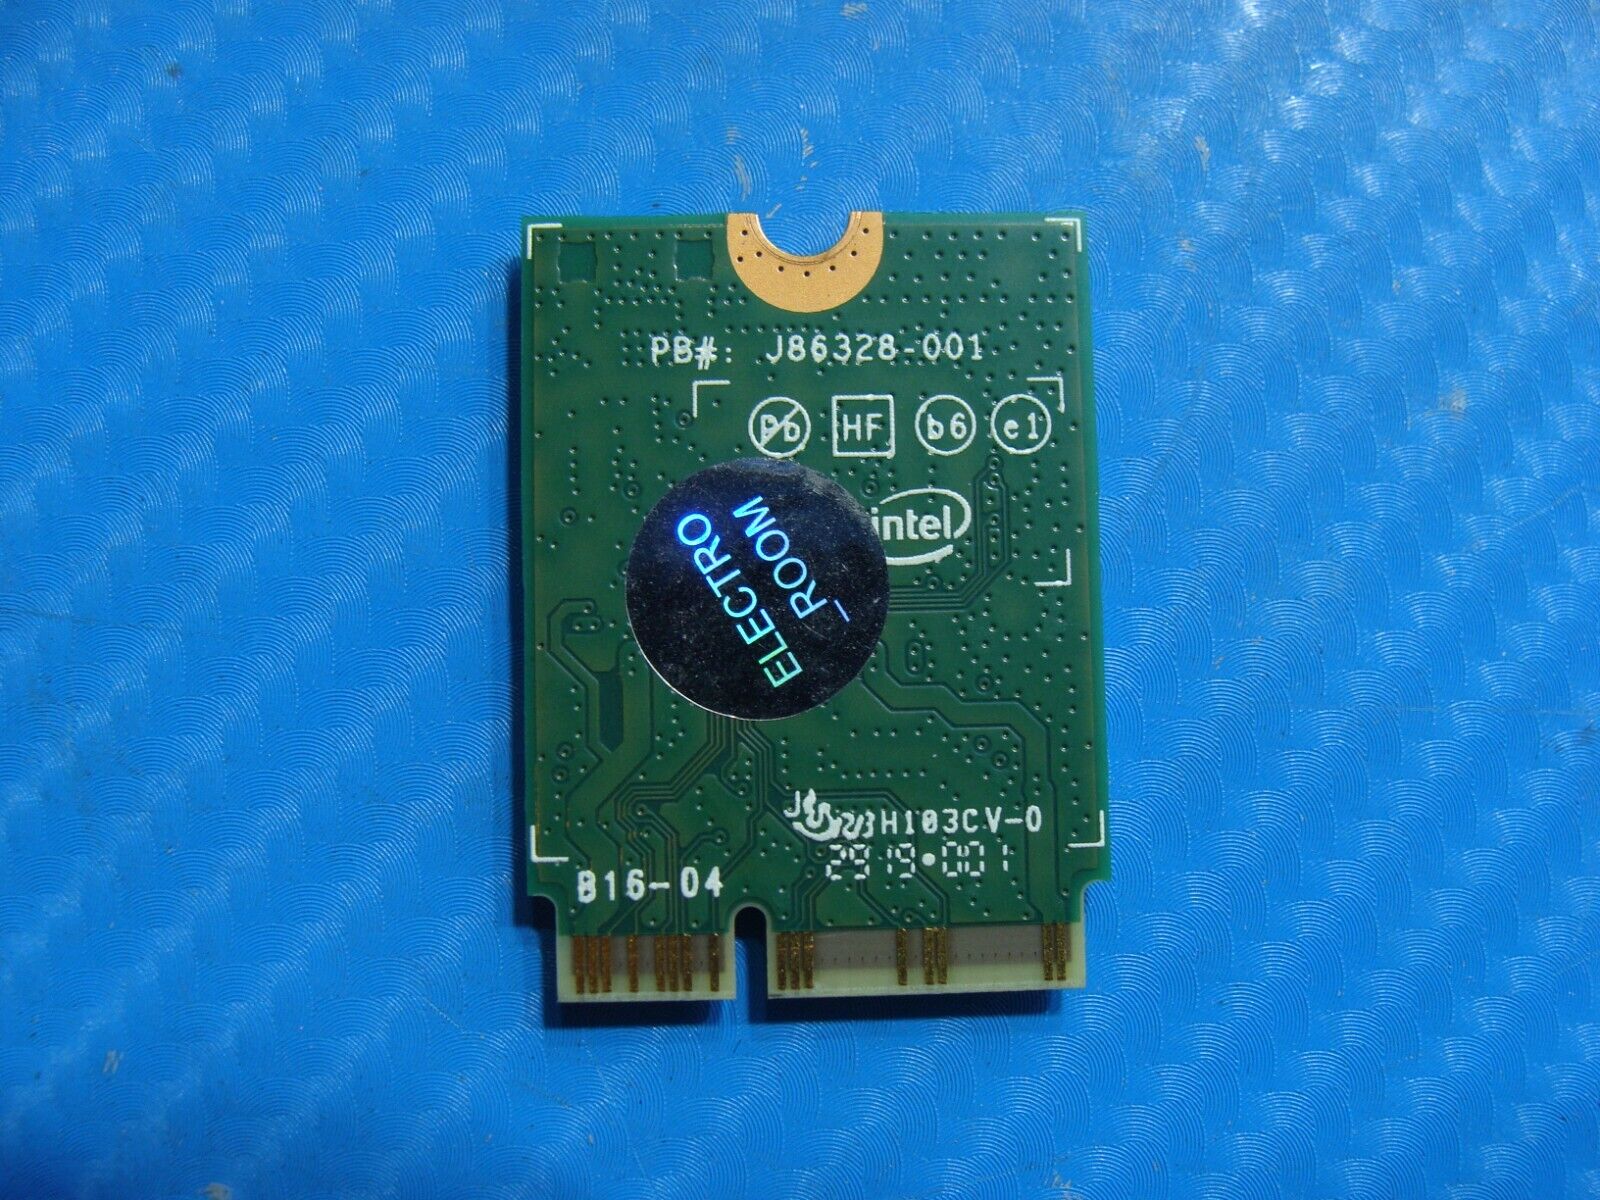 Dell Inspiron 13.3” 7391 2in1 Genuine Laptop Wireless WiFi Card AX201NGW 0P1C6J